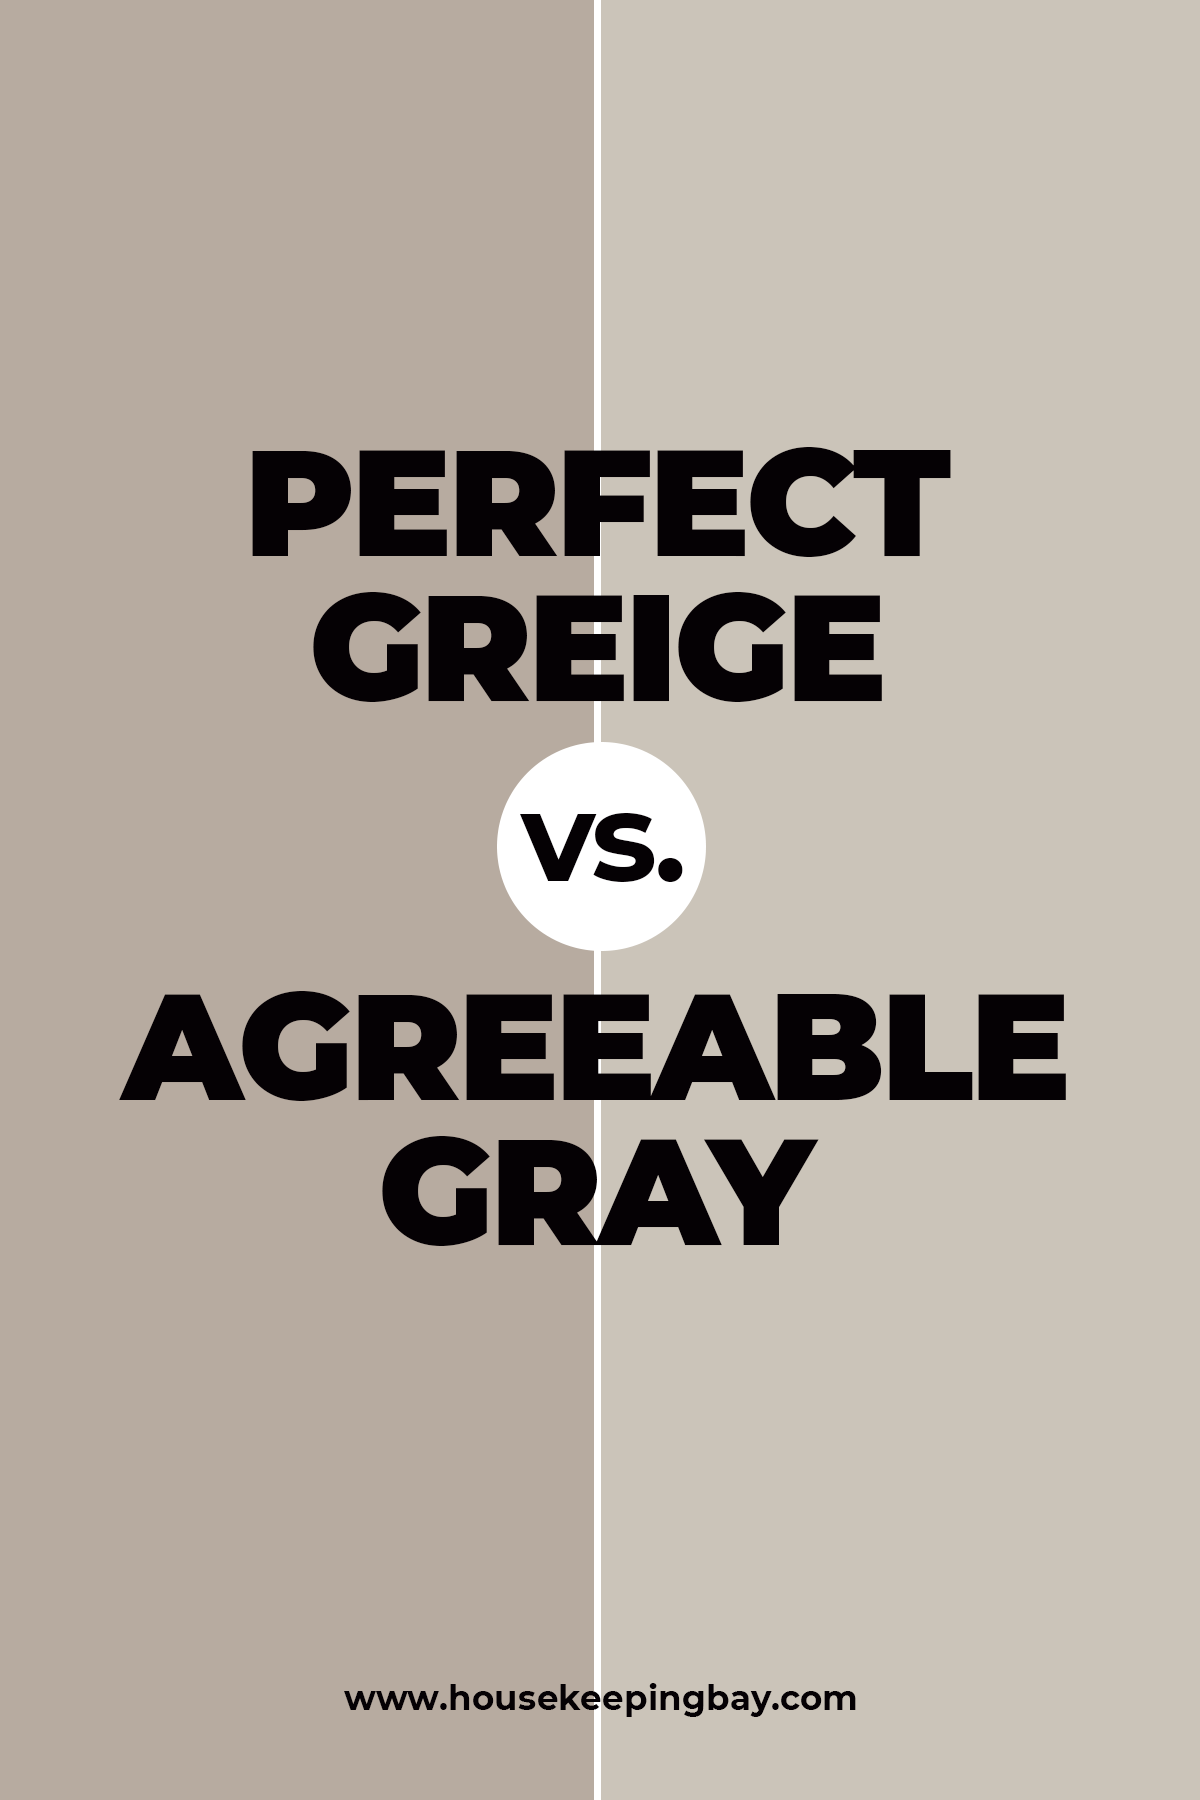 Perfect Greige vs. Agreeable Gray